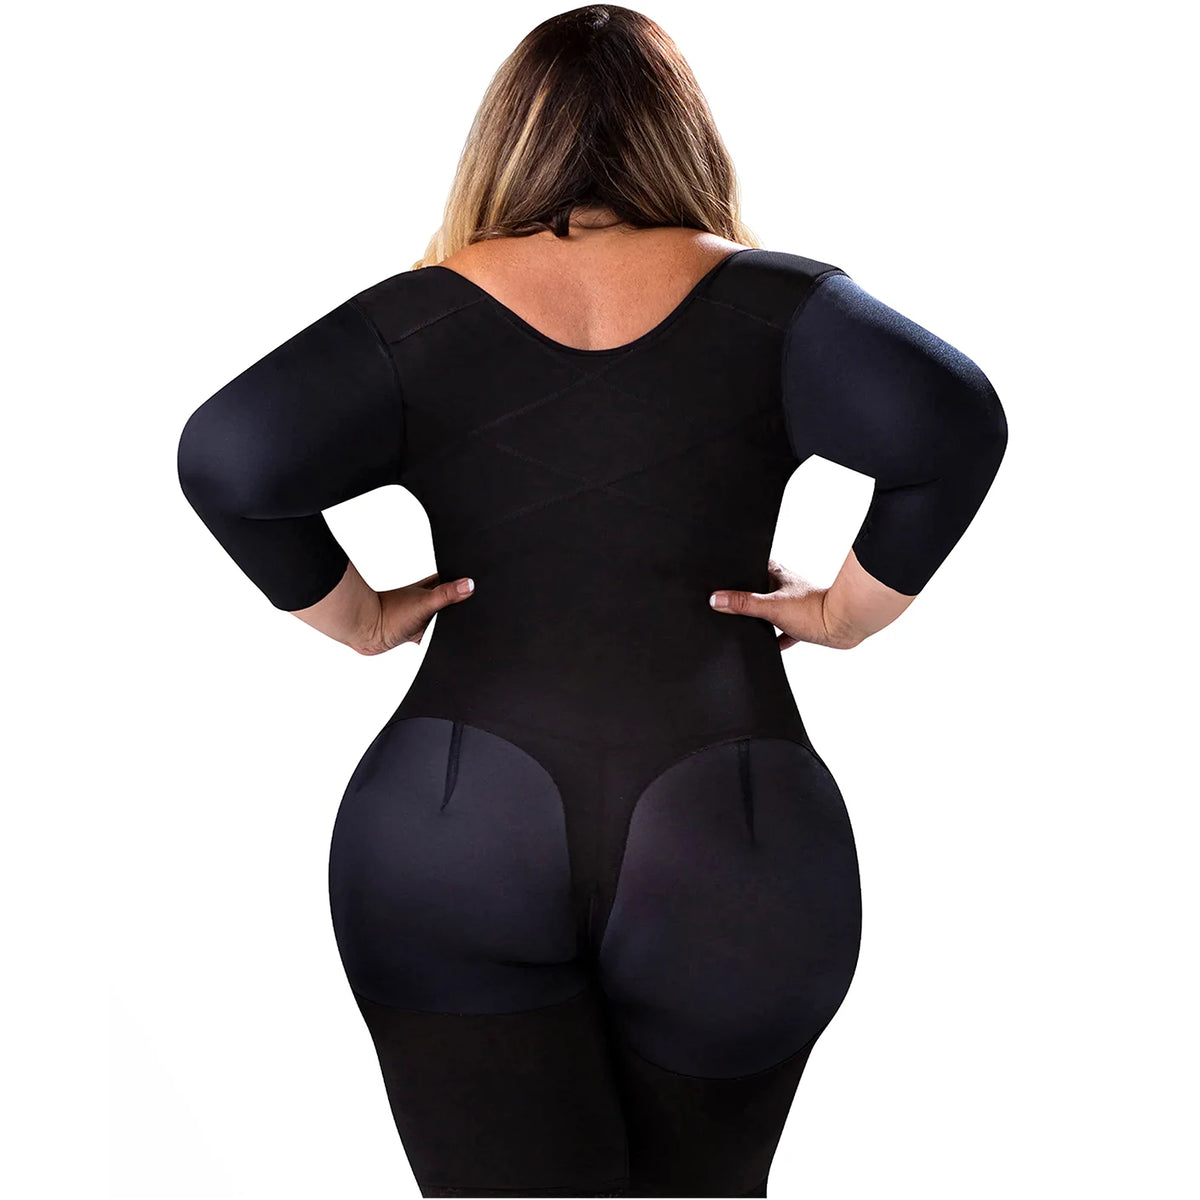 SNATCHED BODY - 15 Photos - 2600 NW 87th Ave, Doral, Florida - Plus Size  Fashion - Phone Number - Yelp